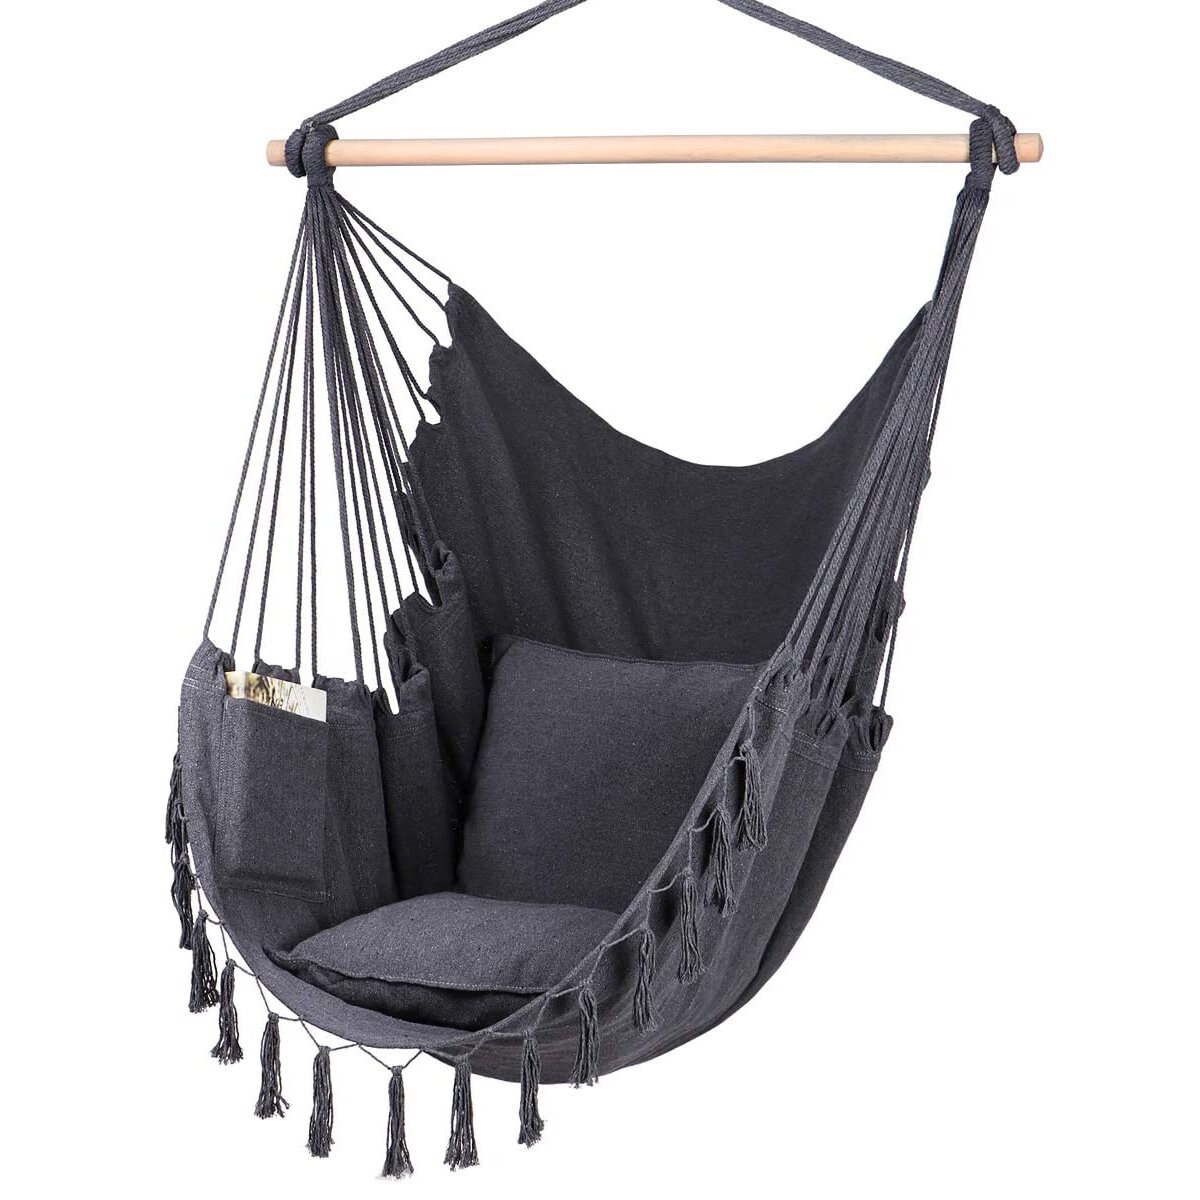 Max 330Lbs/150KG Hammock Chair Hanging Rope Swing with 2 Cushions Included Large Tassel Hanging Chai